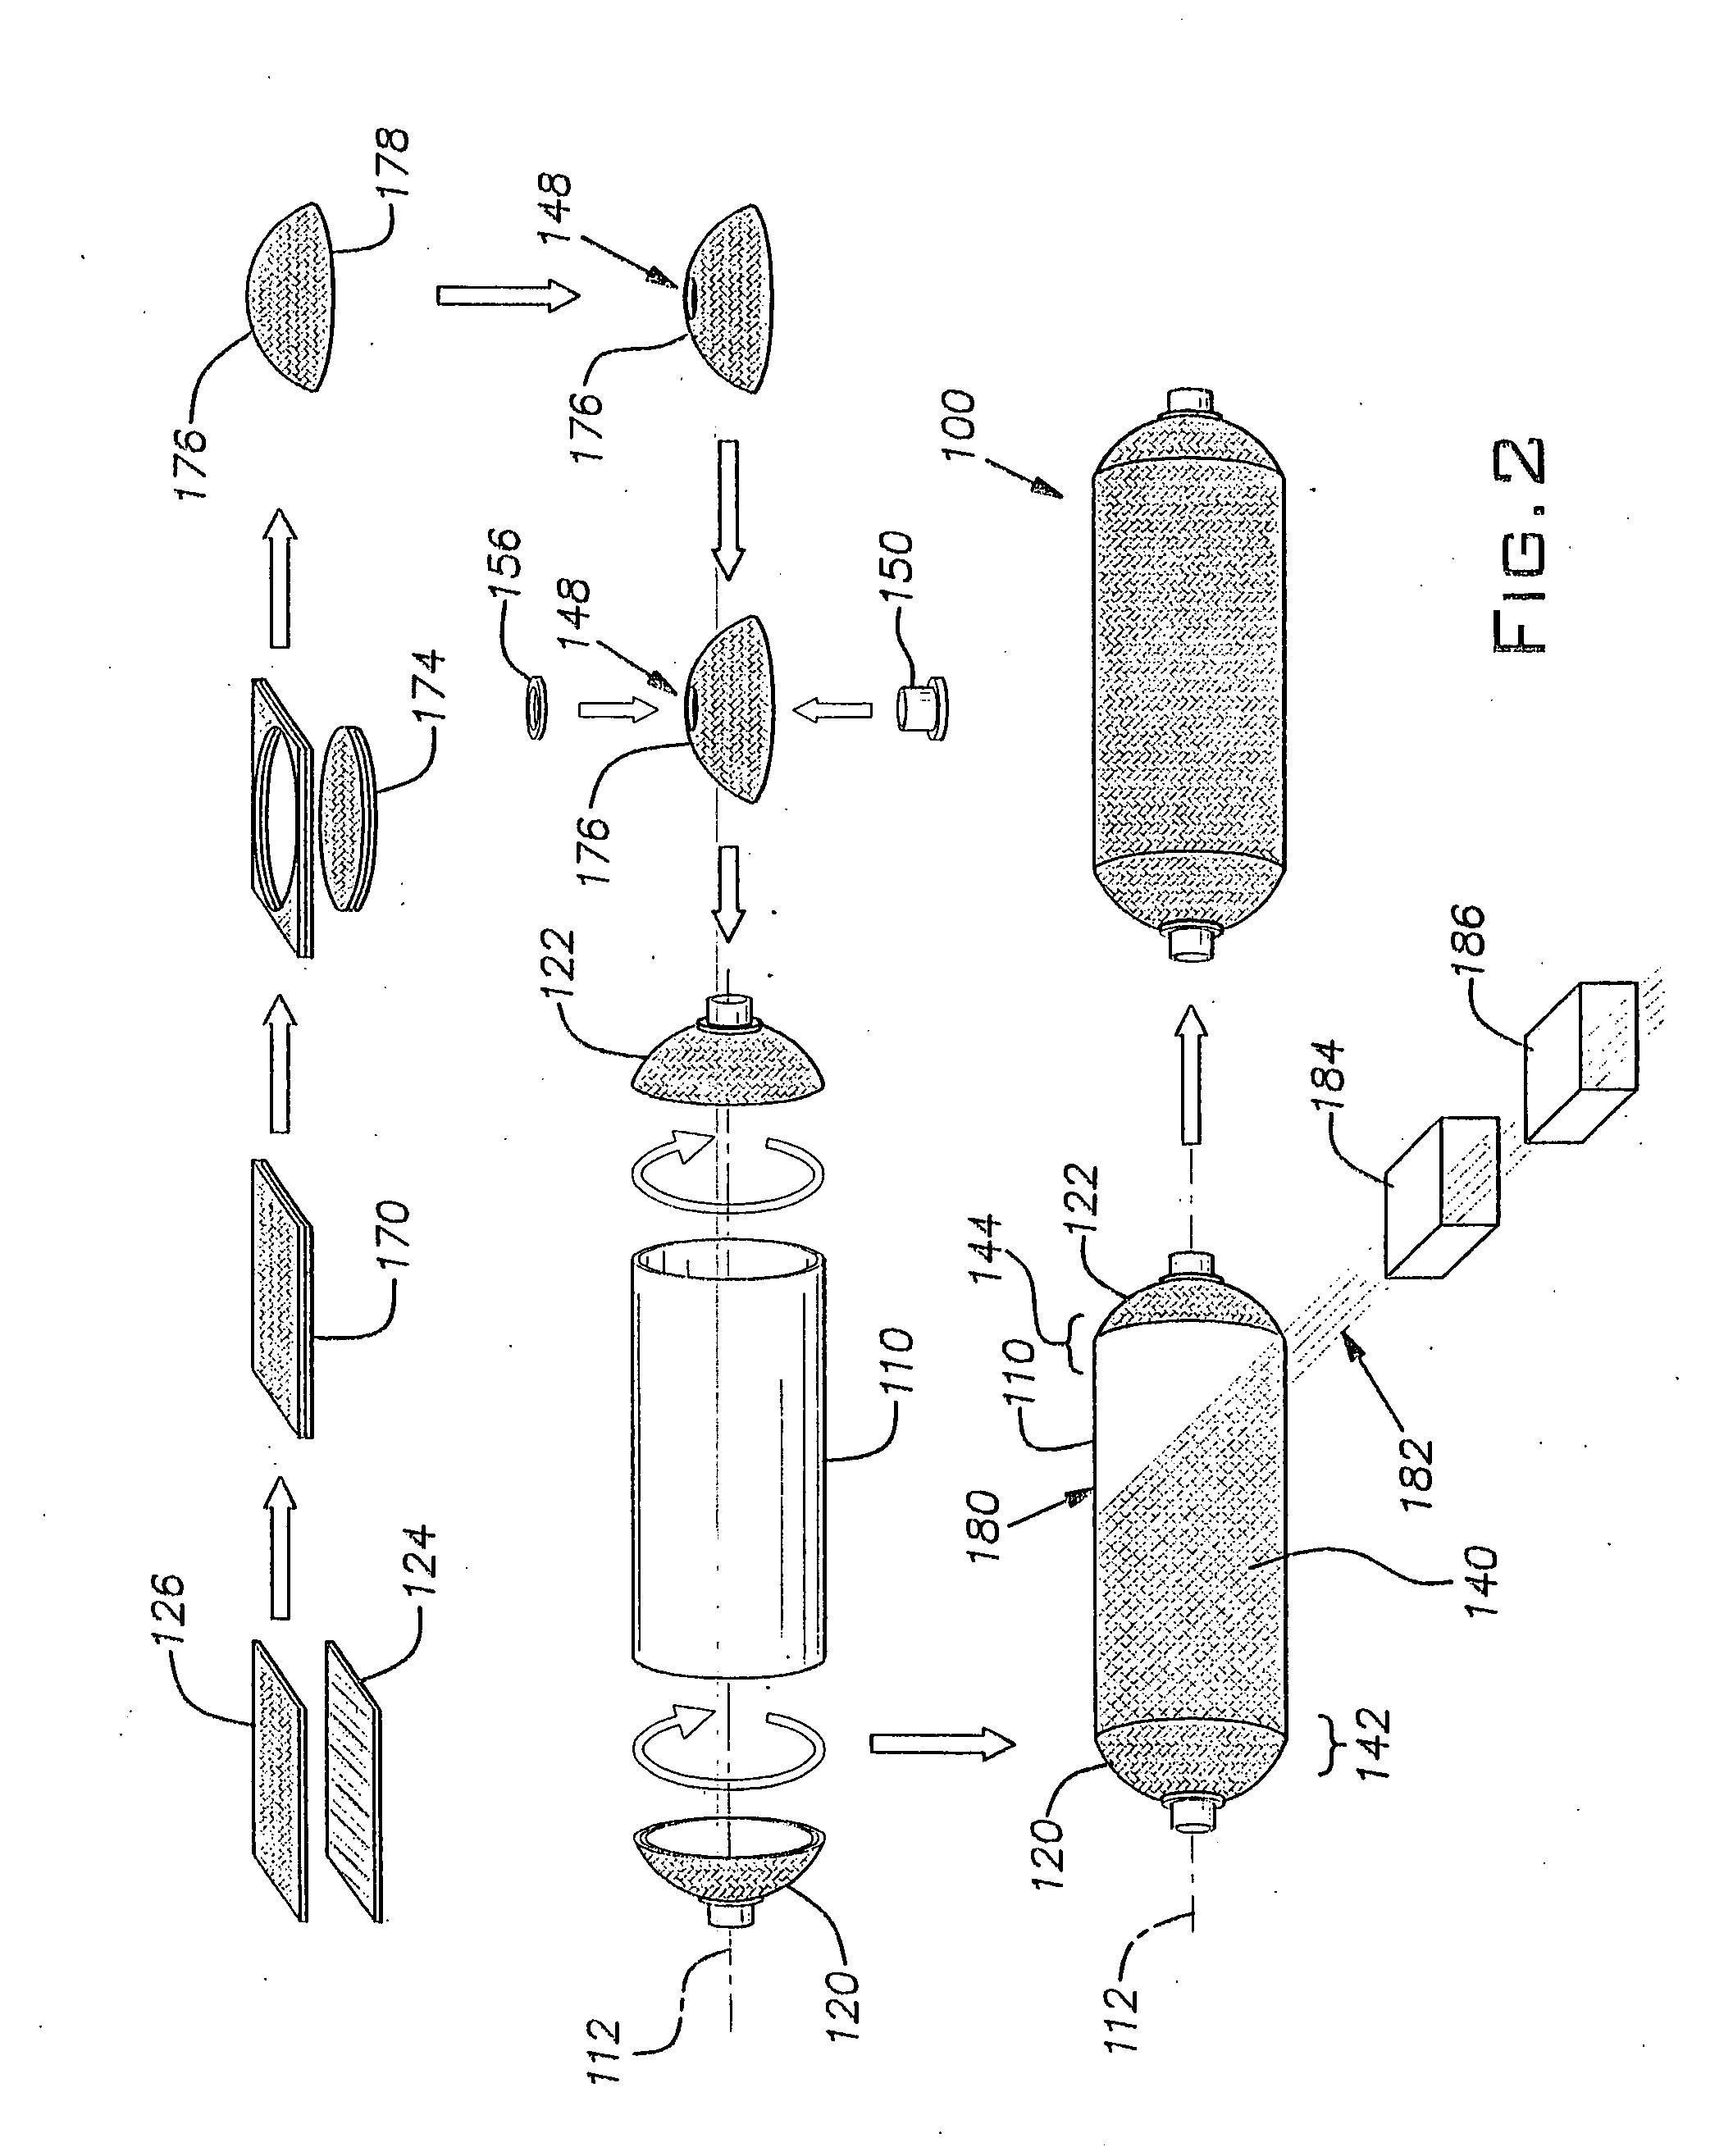 Composite pressure vessel assembly and method